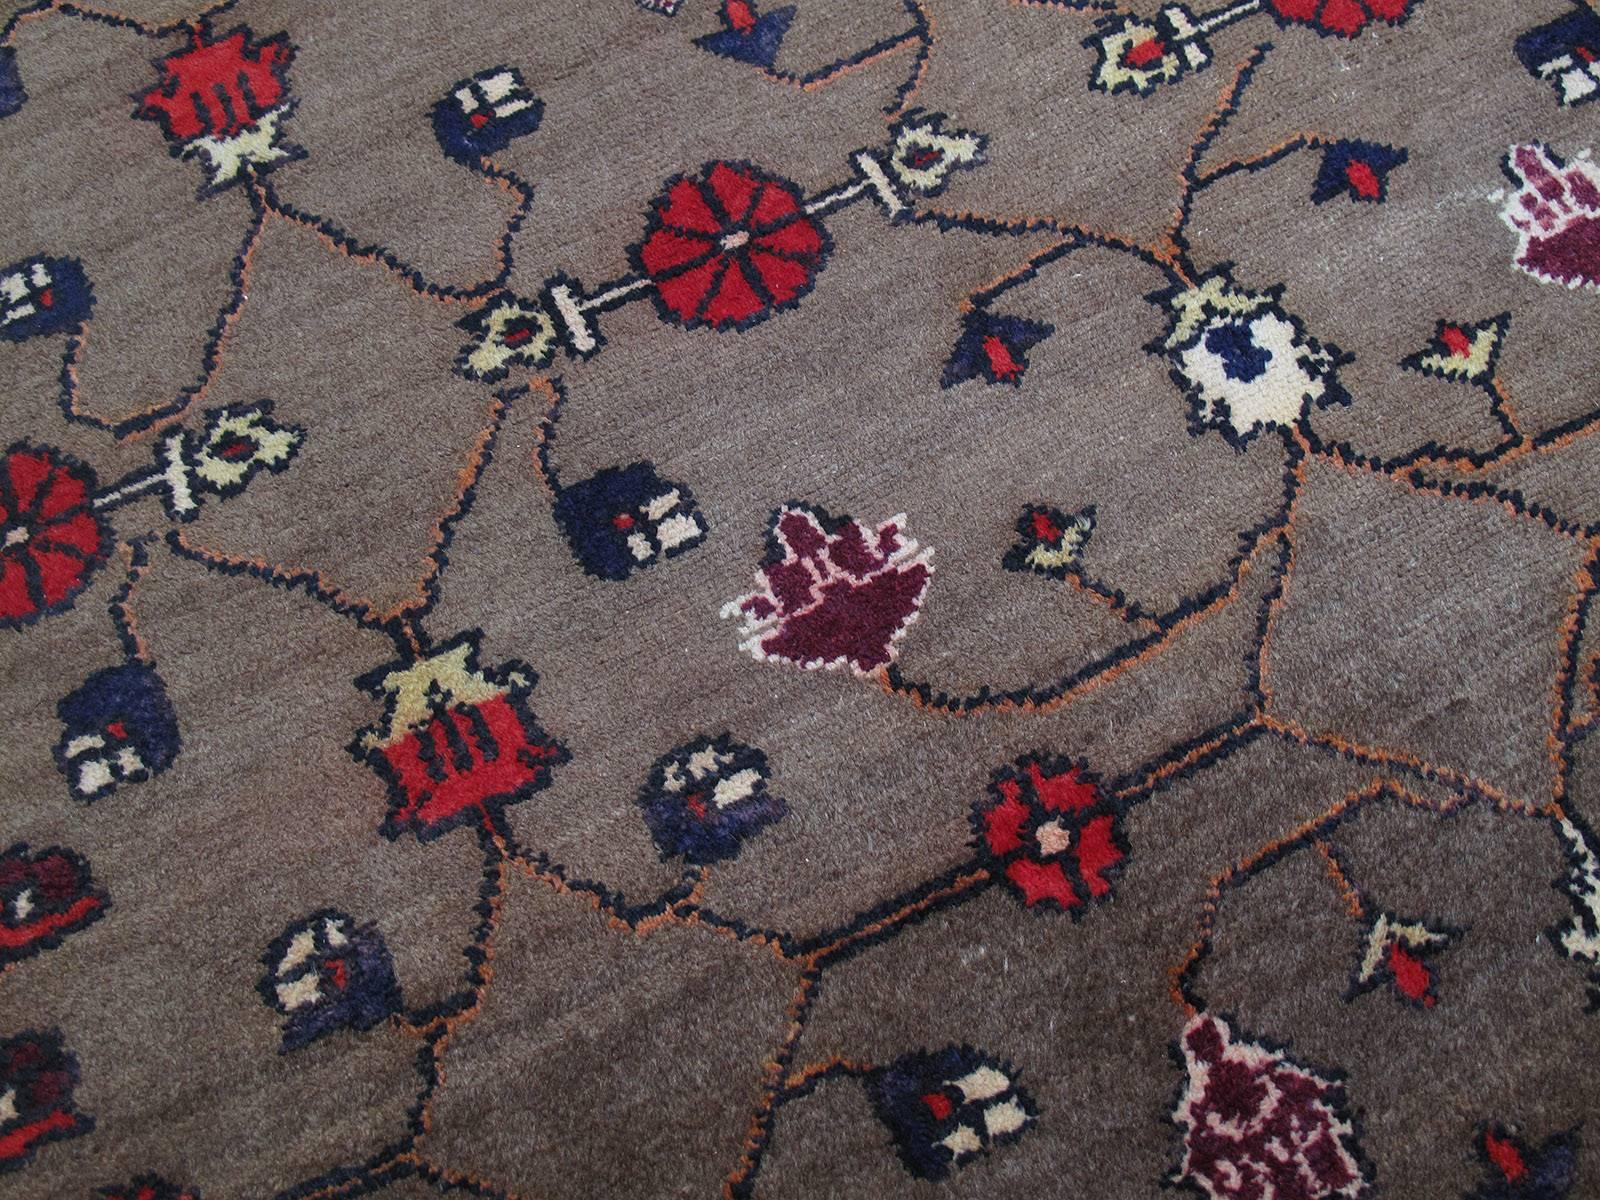 Hand-Knotted Karapinar Rug with Flower Lattice Design